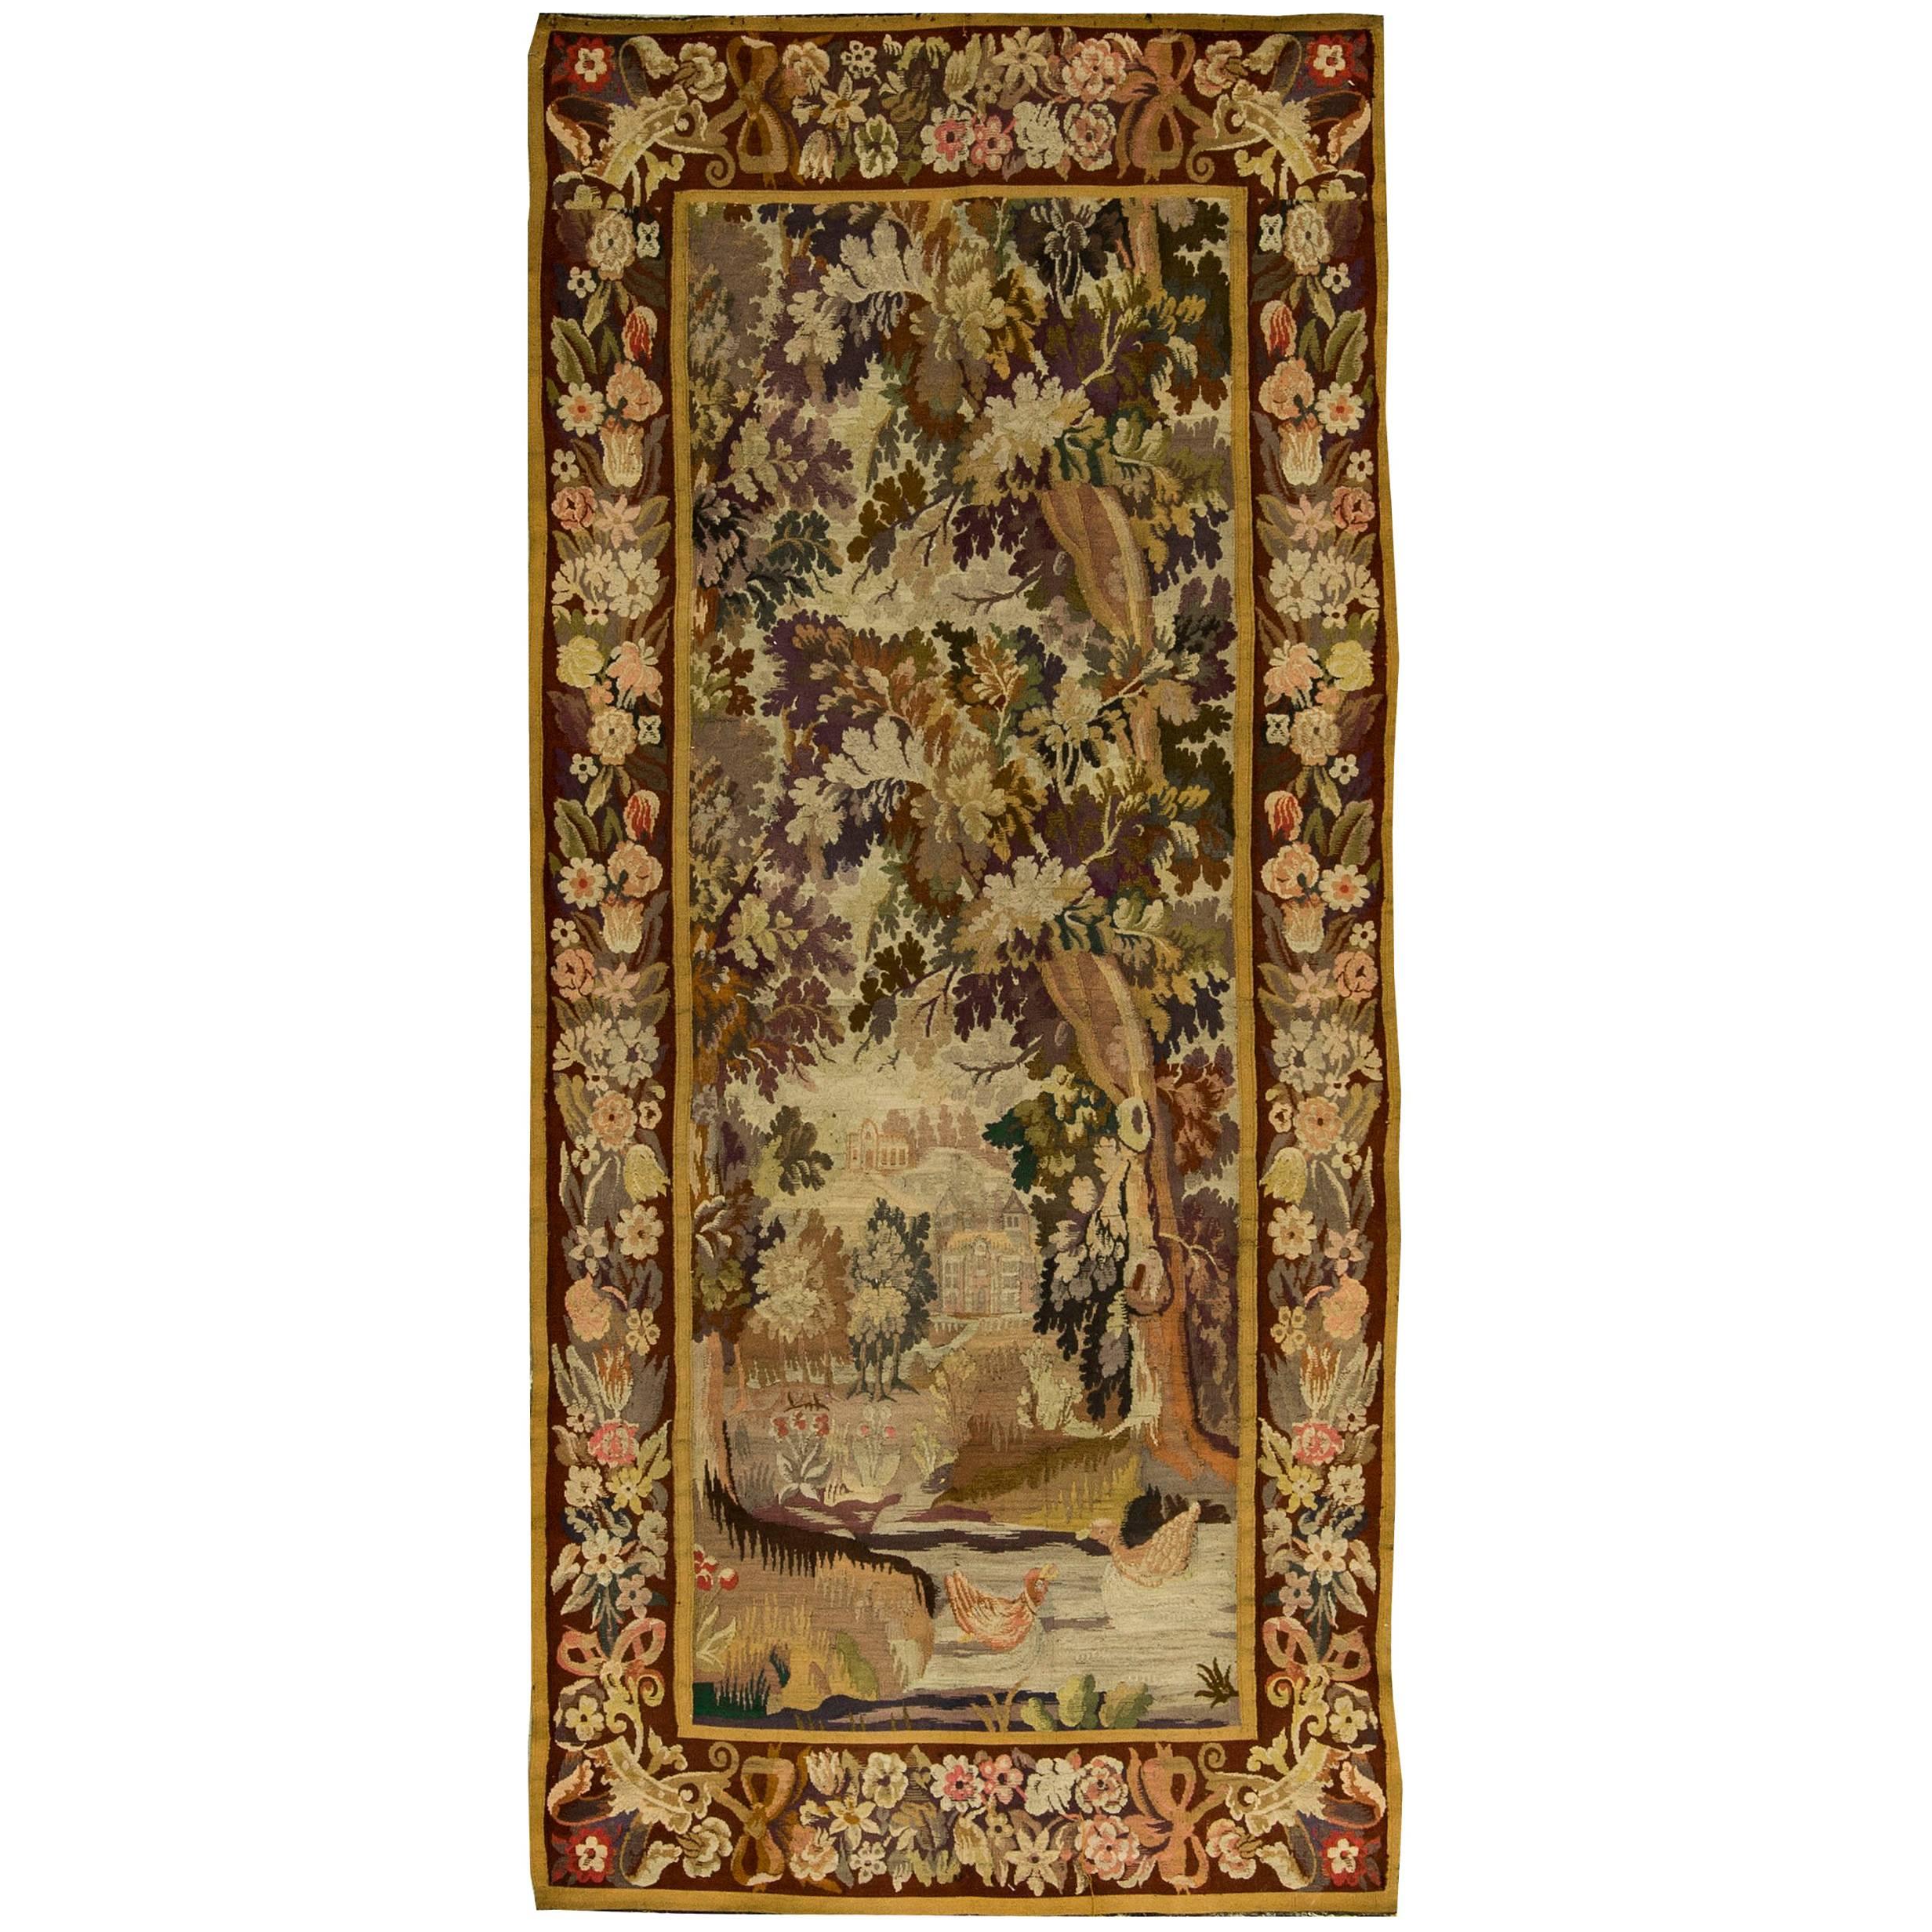 19th Century French Countryside Scene Tapestry 4'4 x 9'4